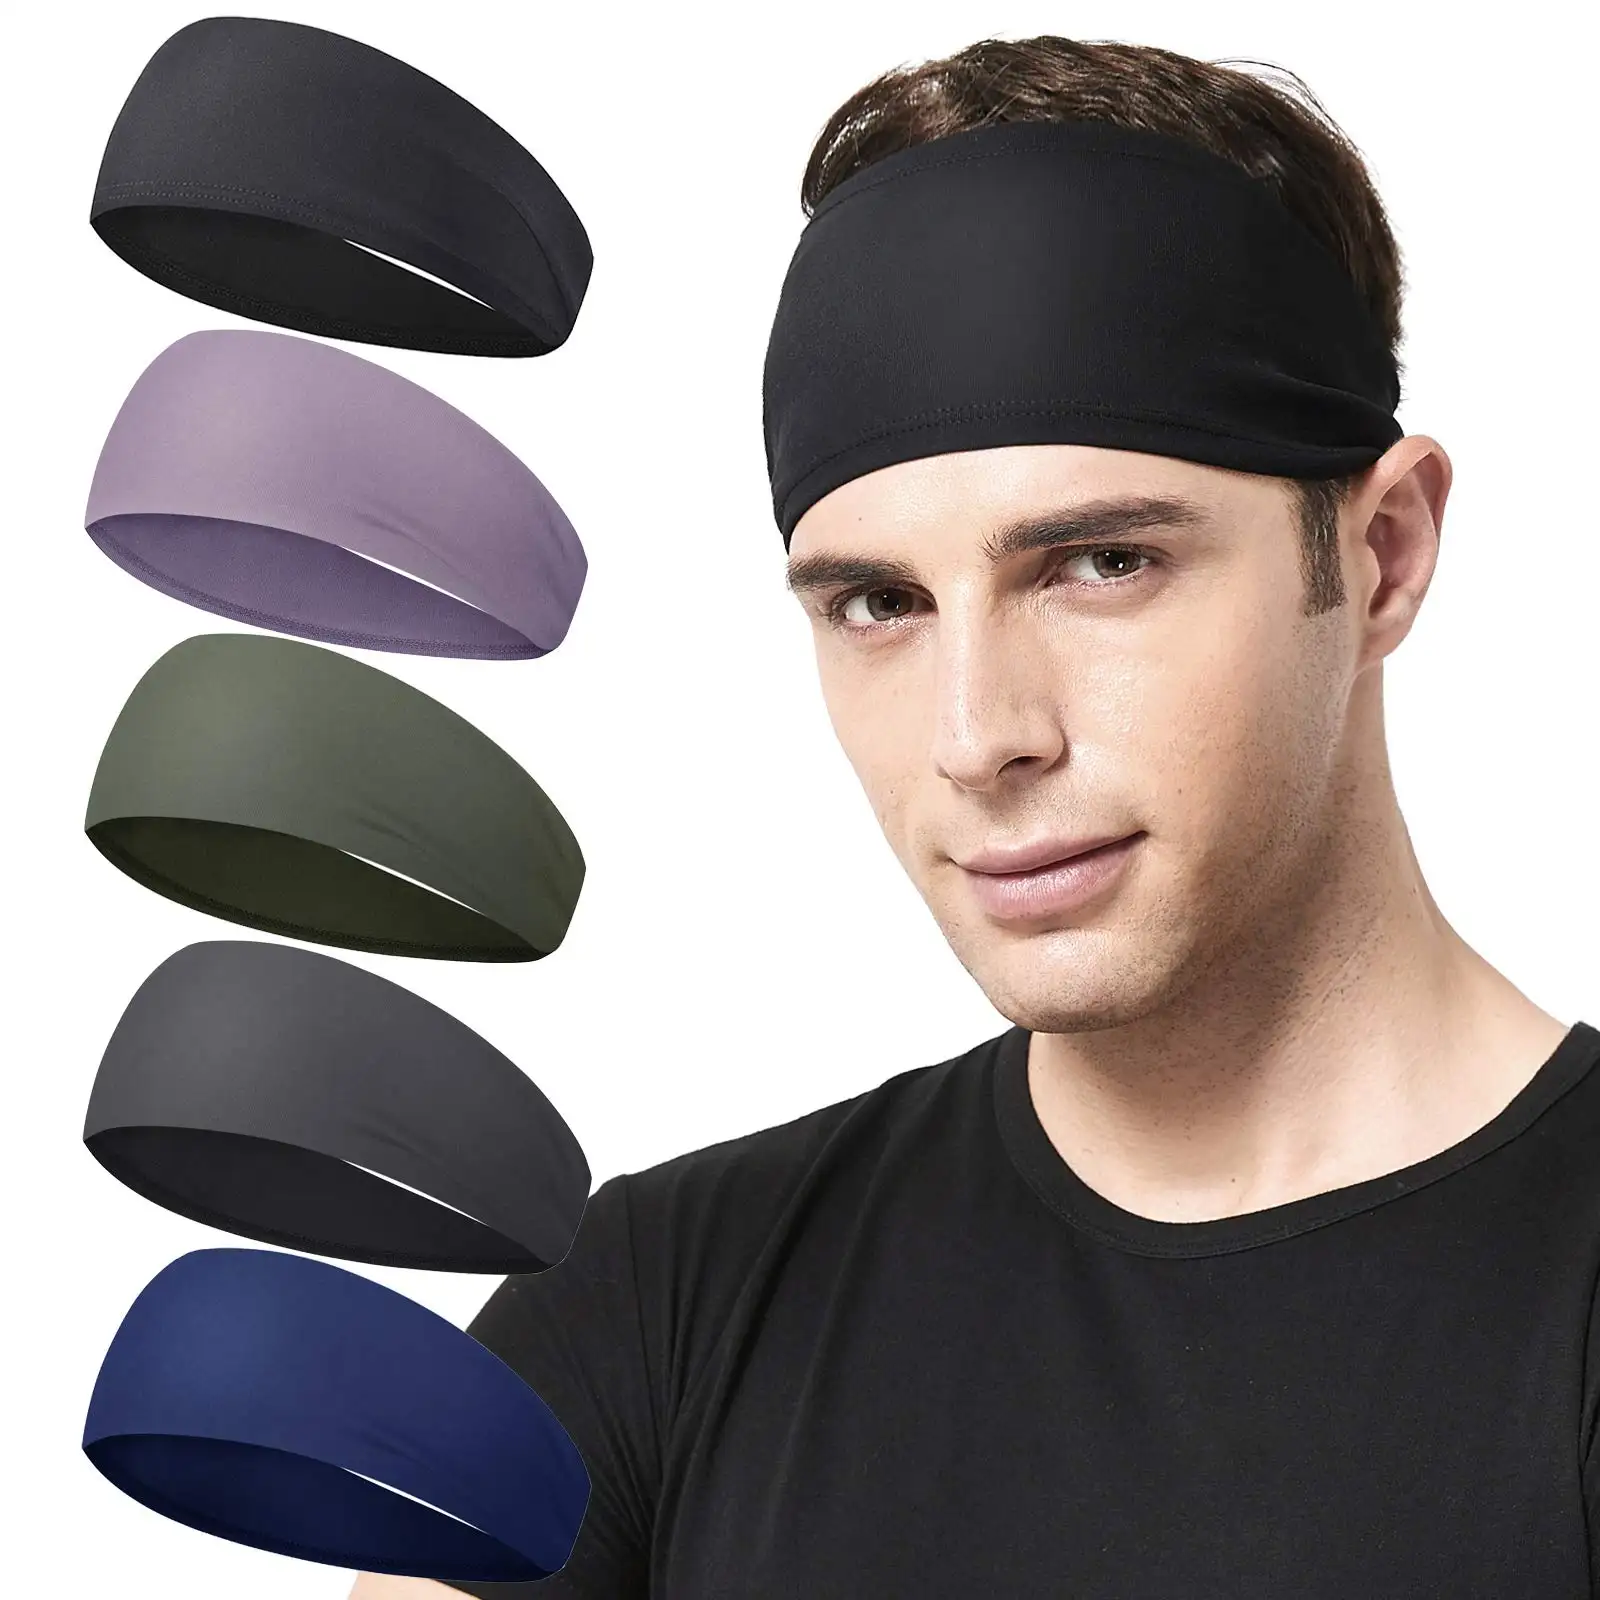 Men Headbands Running Cycling Basketball Sports Accessories Sweat Bands Yoga Fitness Workout Woman Stretchy Unisex Hairband